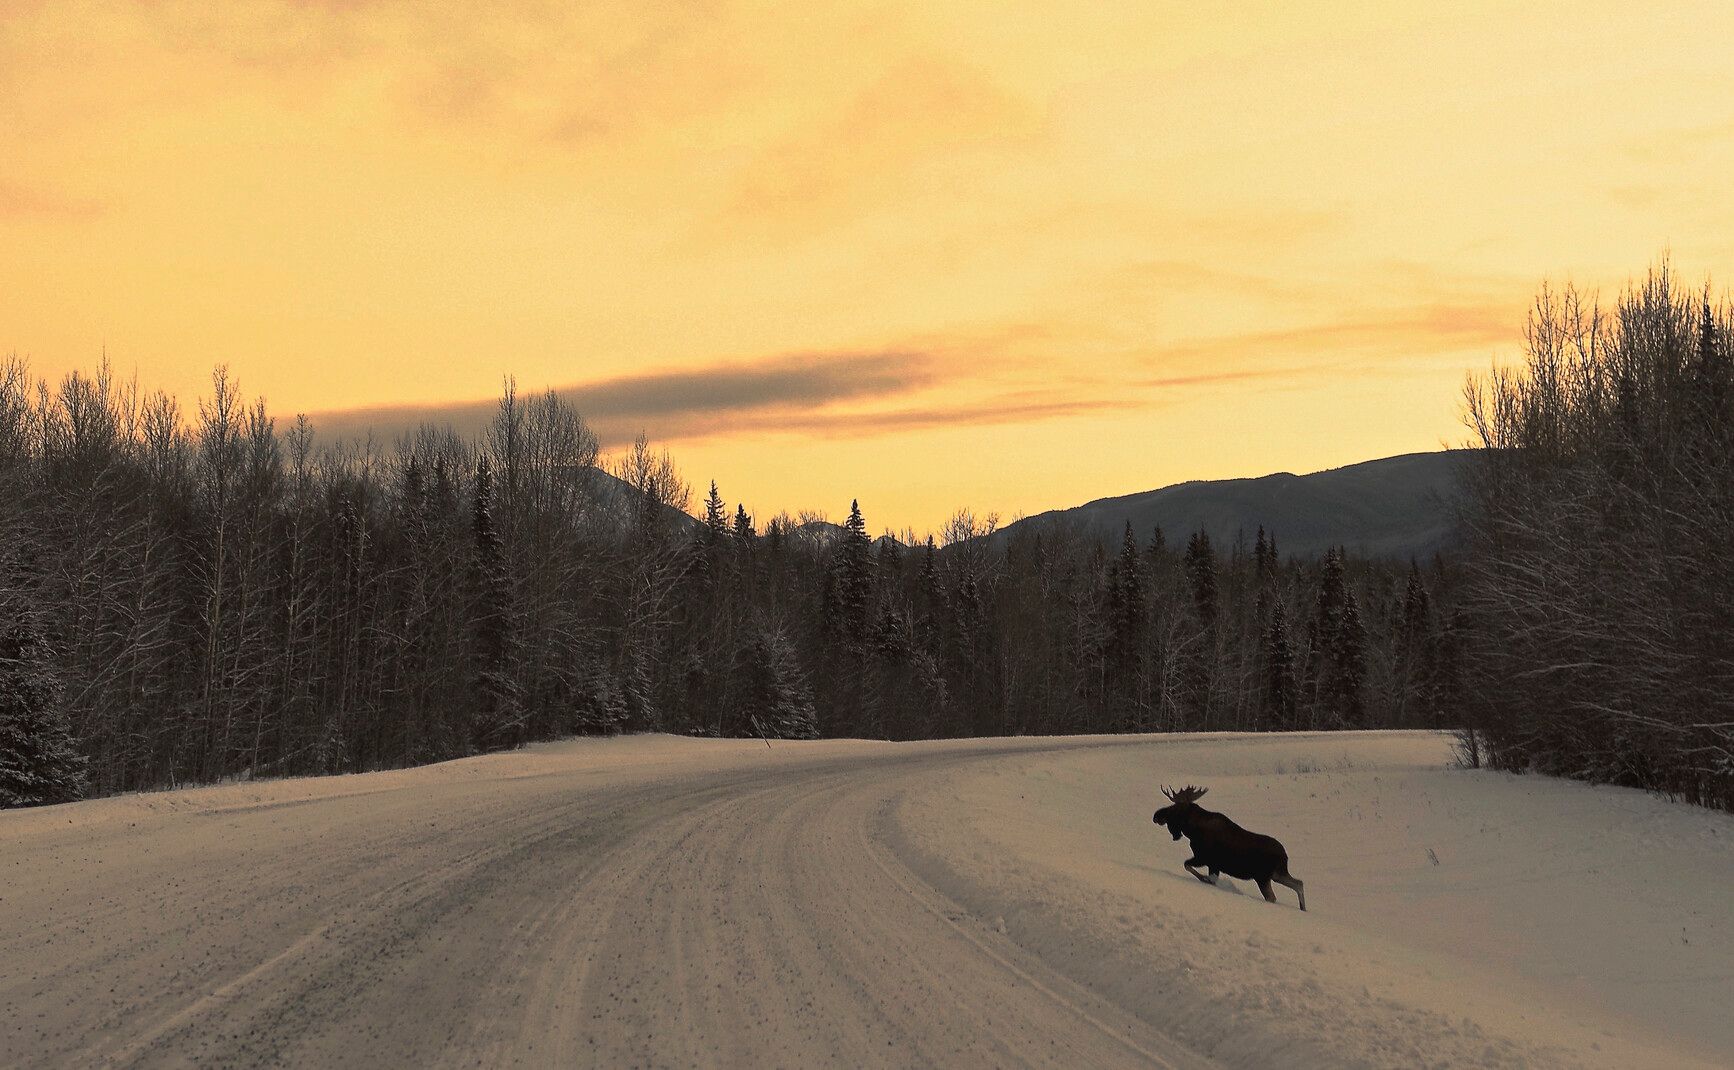 As the sun sets over the park, a moose makes a journey through the snow along the highway. Liard River Hot Springs Park.